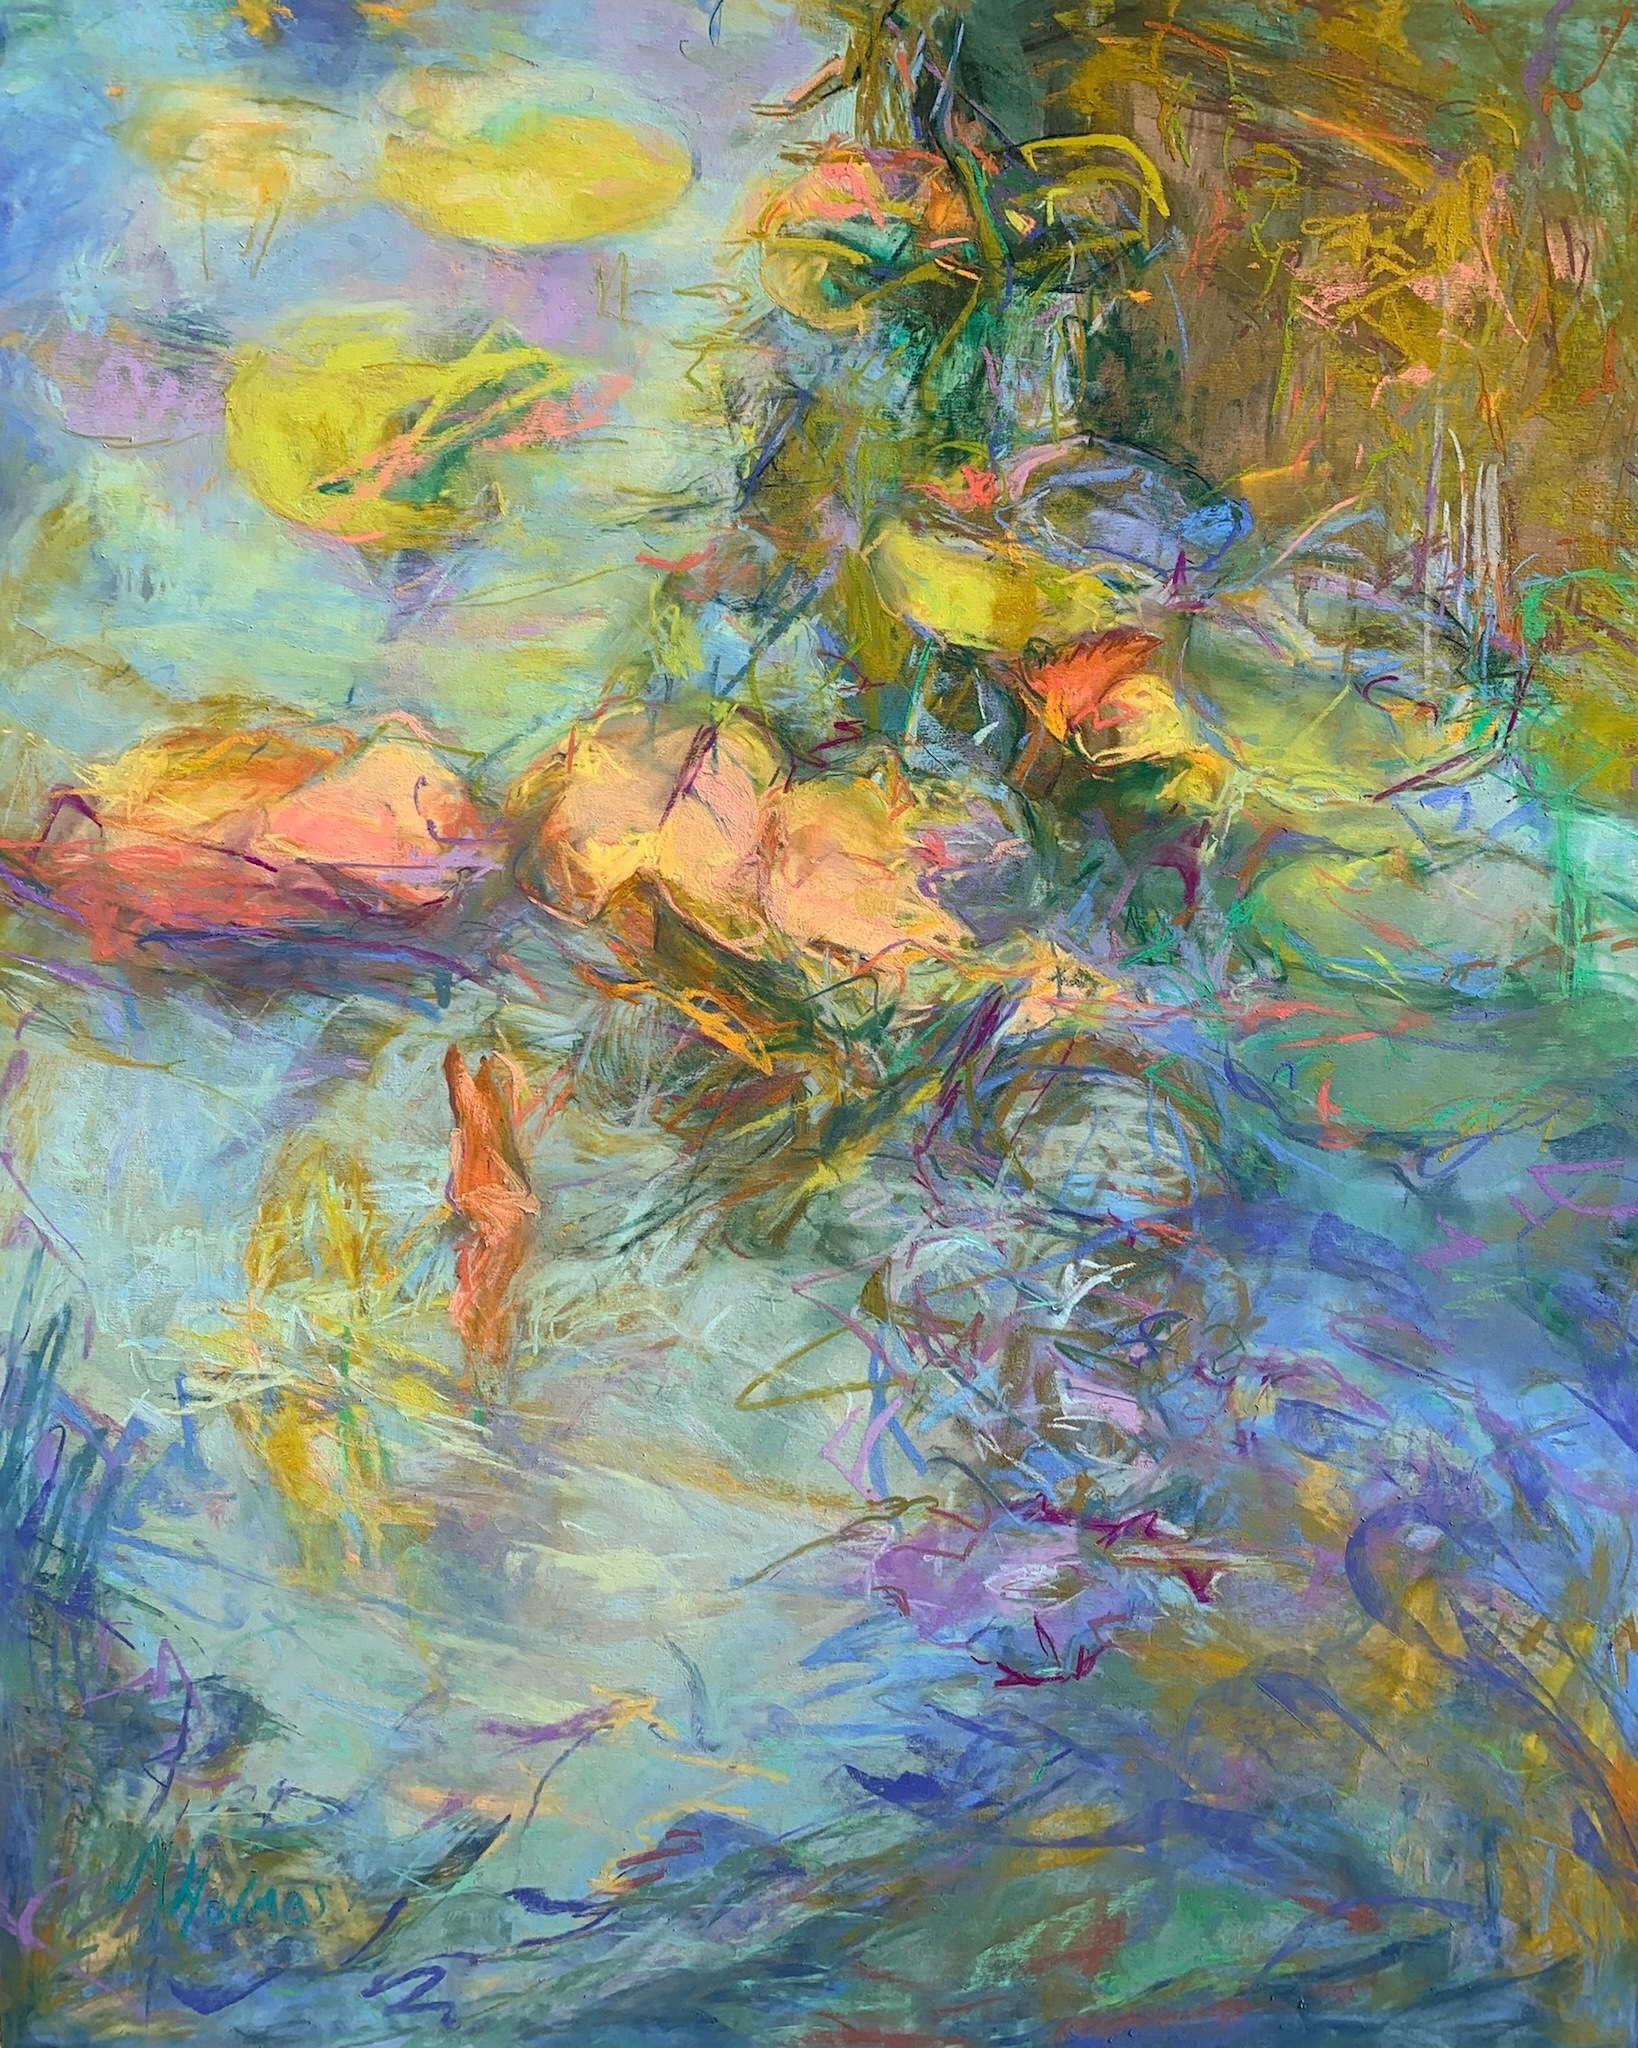 Best Floral -Marcia Holmes, "Rainbow Water Lilies," pastel, 30 x 24 in, October 2022 Best Floral